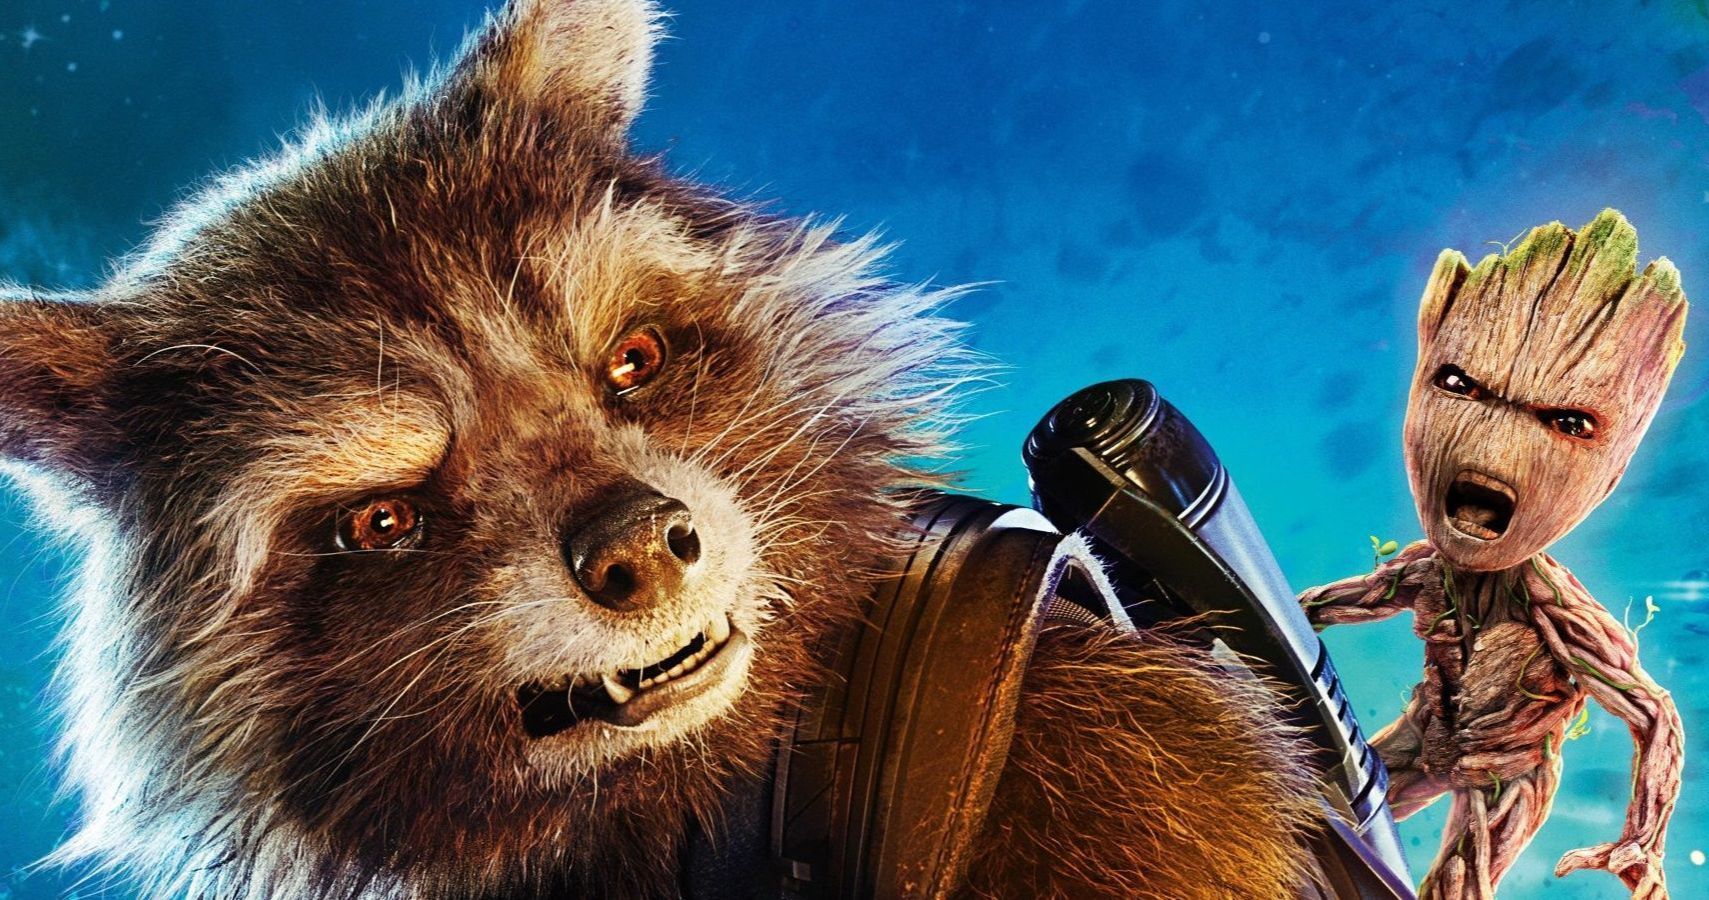 James Gunn Shot Footage for a Scrapped Guardians of the Galaxy Short with Rocket &amp; Groot